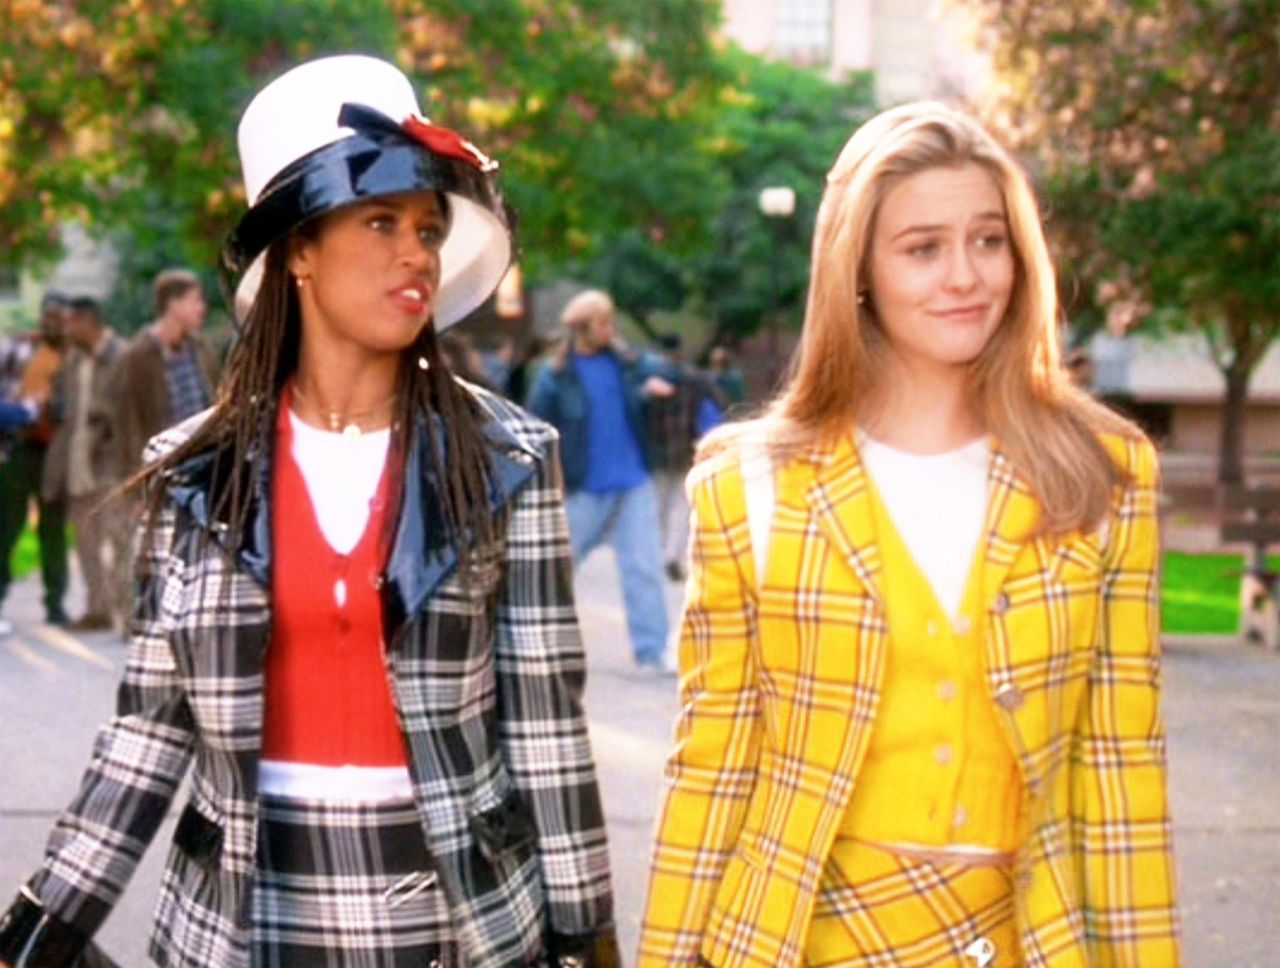 Stacey Dash and Alicia Silverstone in a scene from "Clueless," released in 1995.